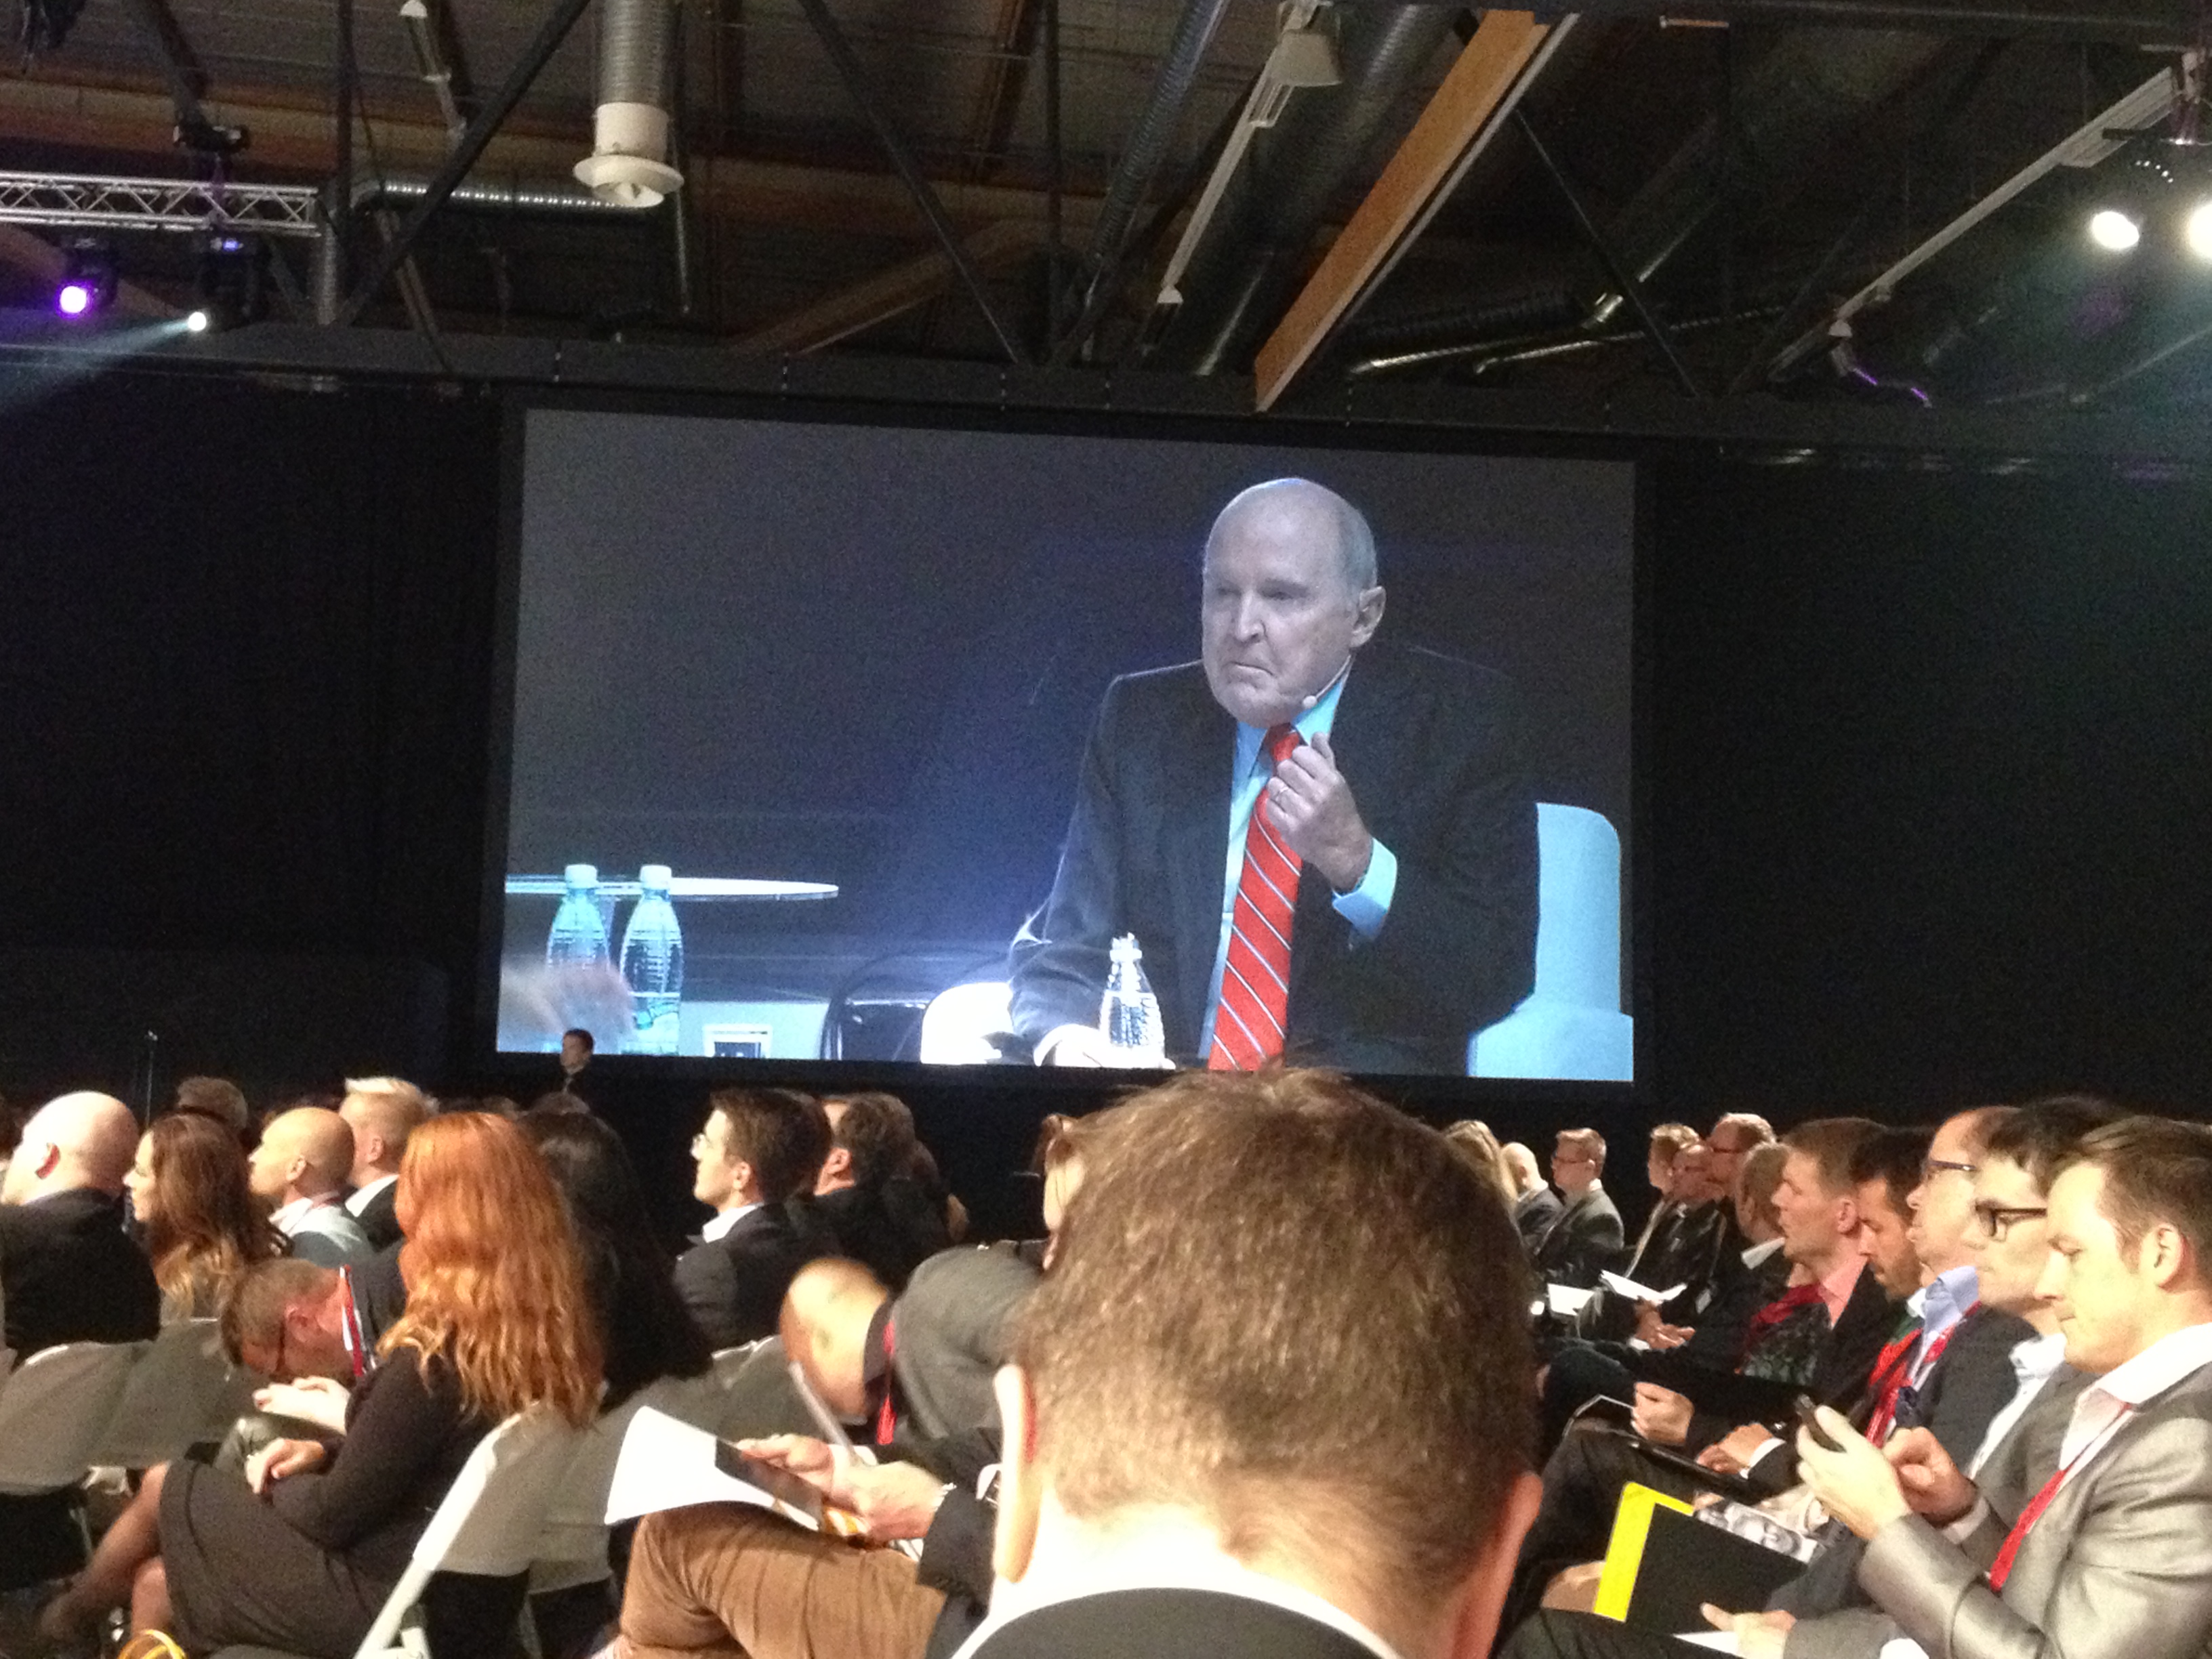 Lessons from Jack Welch at Nordic Business Forum 2013 – Applied to Digital Transformation